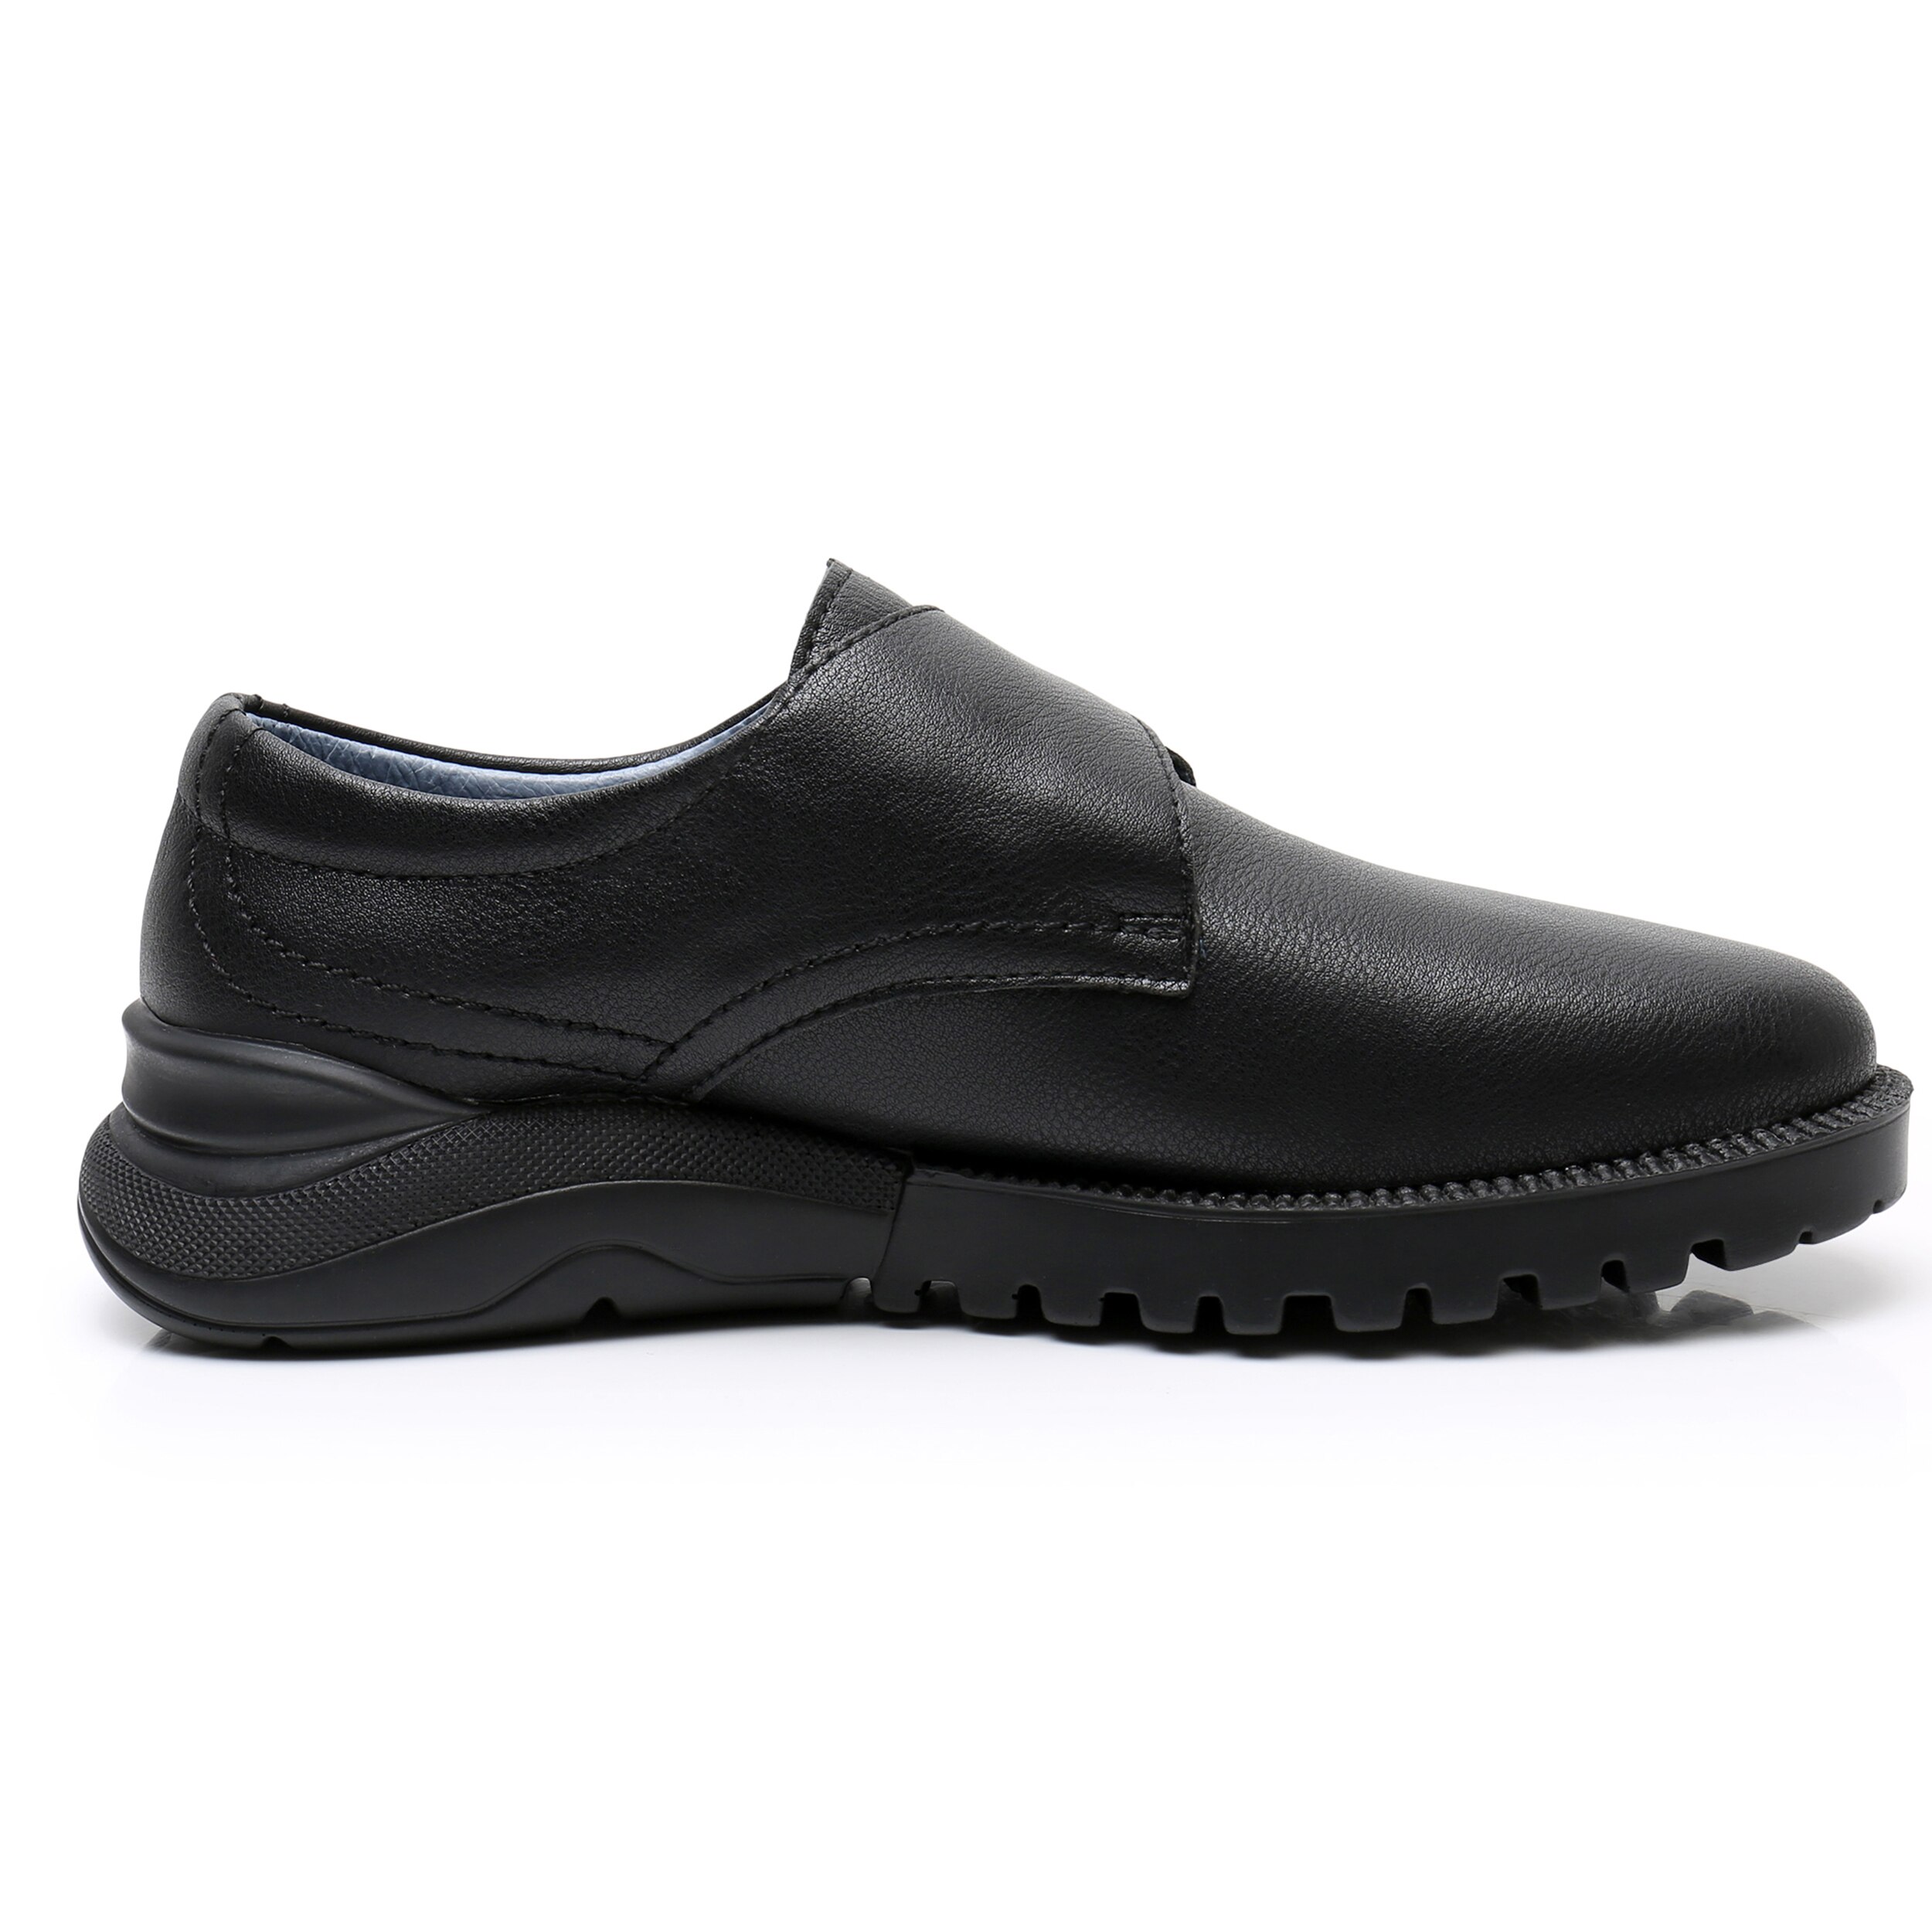 Boys Solid Genuine Leather Shoes